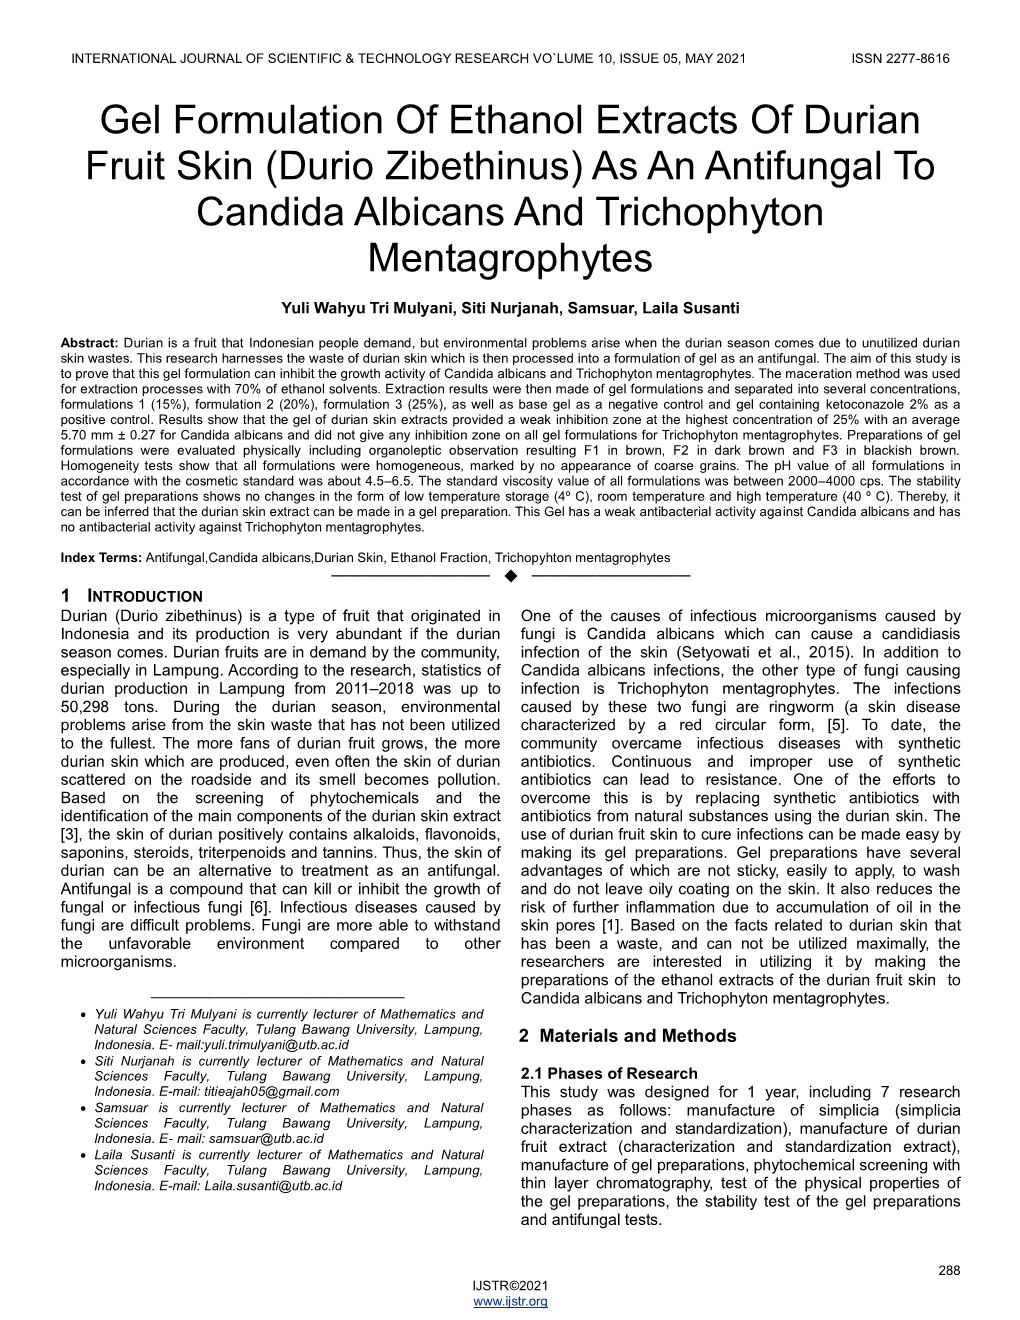 Gel Formulation of Ethanol Extracts of Durian Fruit Skin (Durio Zibethinus) As an Antifungal to Candida Albicans and Trichophyton Mentagrophytes